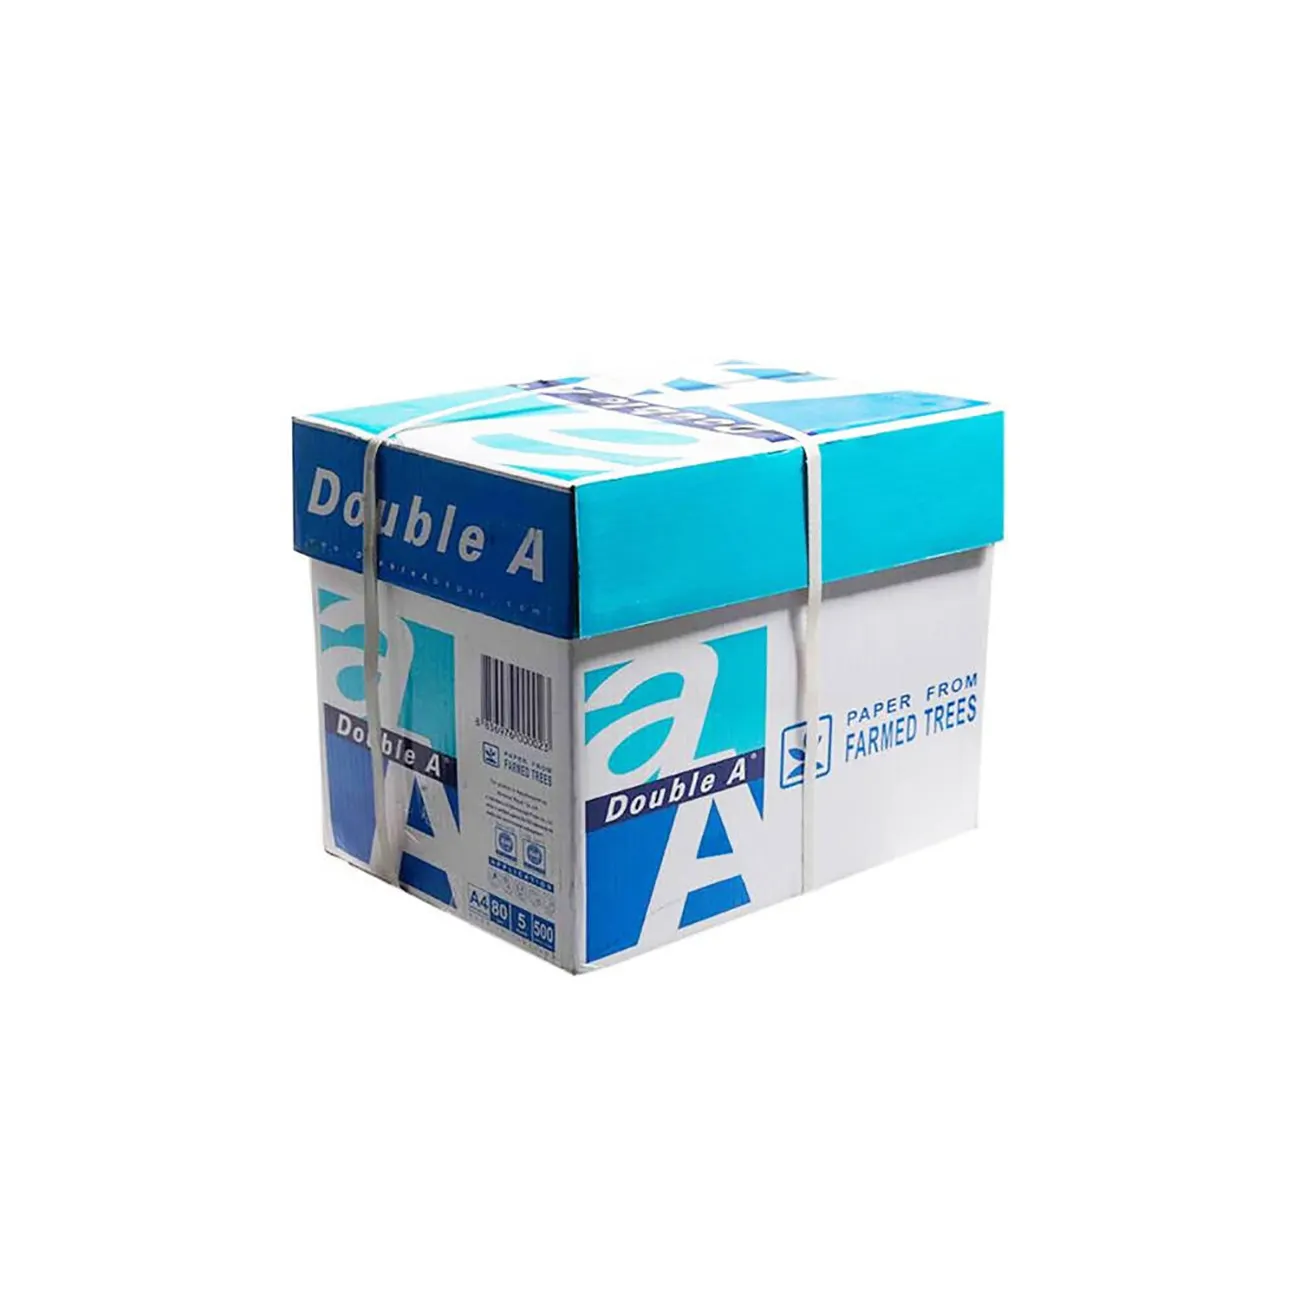 Hot-Selling Products A4 Letter Legal Size Copy Paper Office Paper Typing Paper 80GSM 75GSM 70GSM